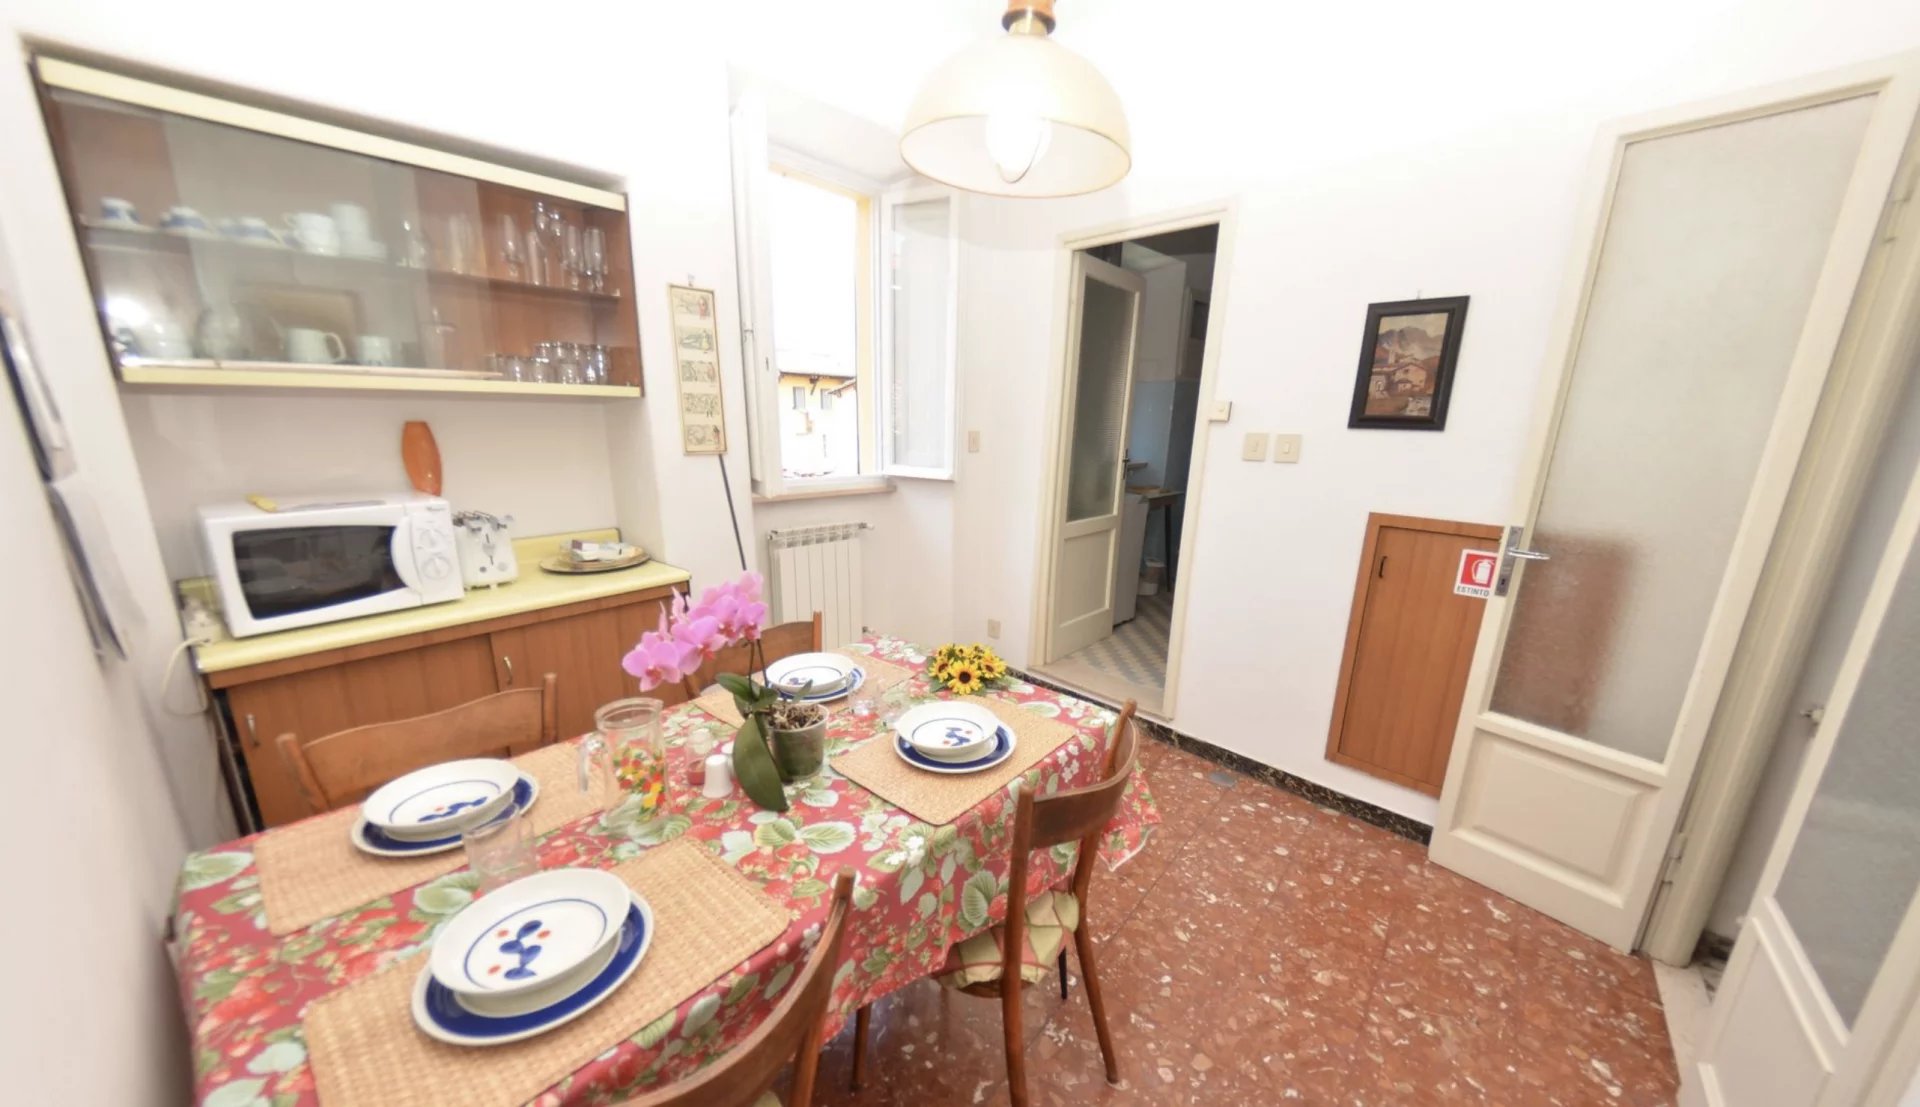 ITALY, TUSCANY, APARTMENT IN LUCCA, UP TO 560€ PER WEEK, FOR 4 PERSONS, BAGNI DI LUCCA